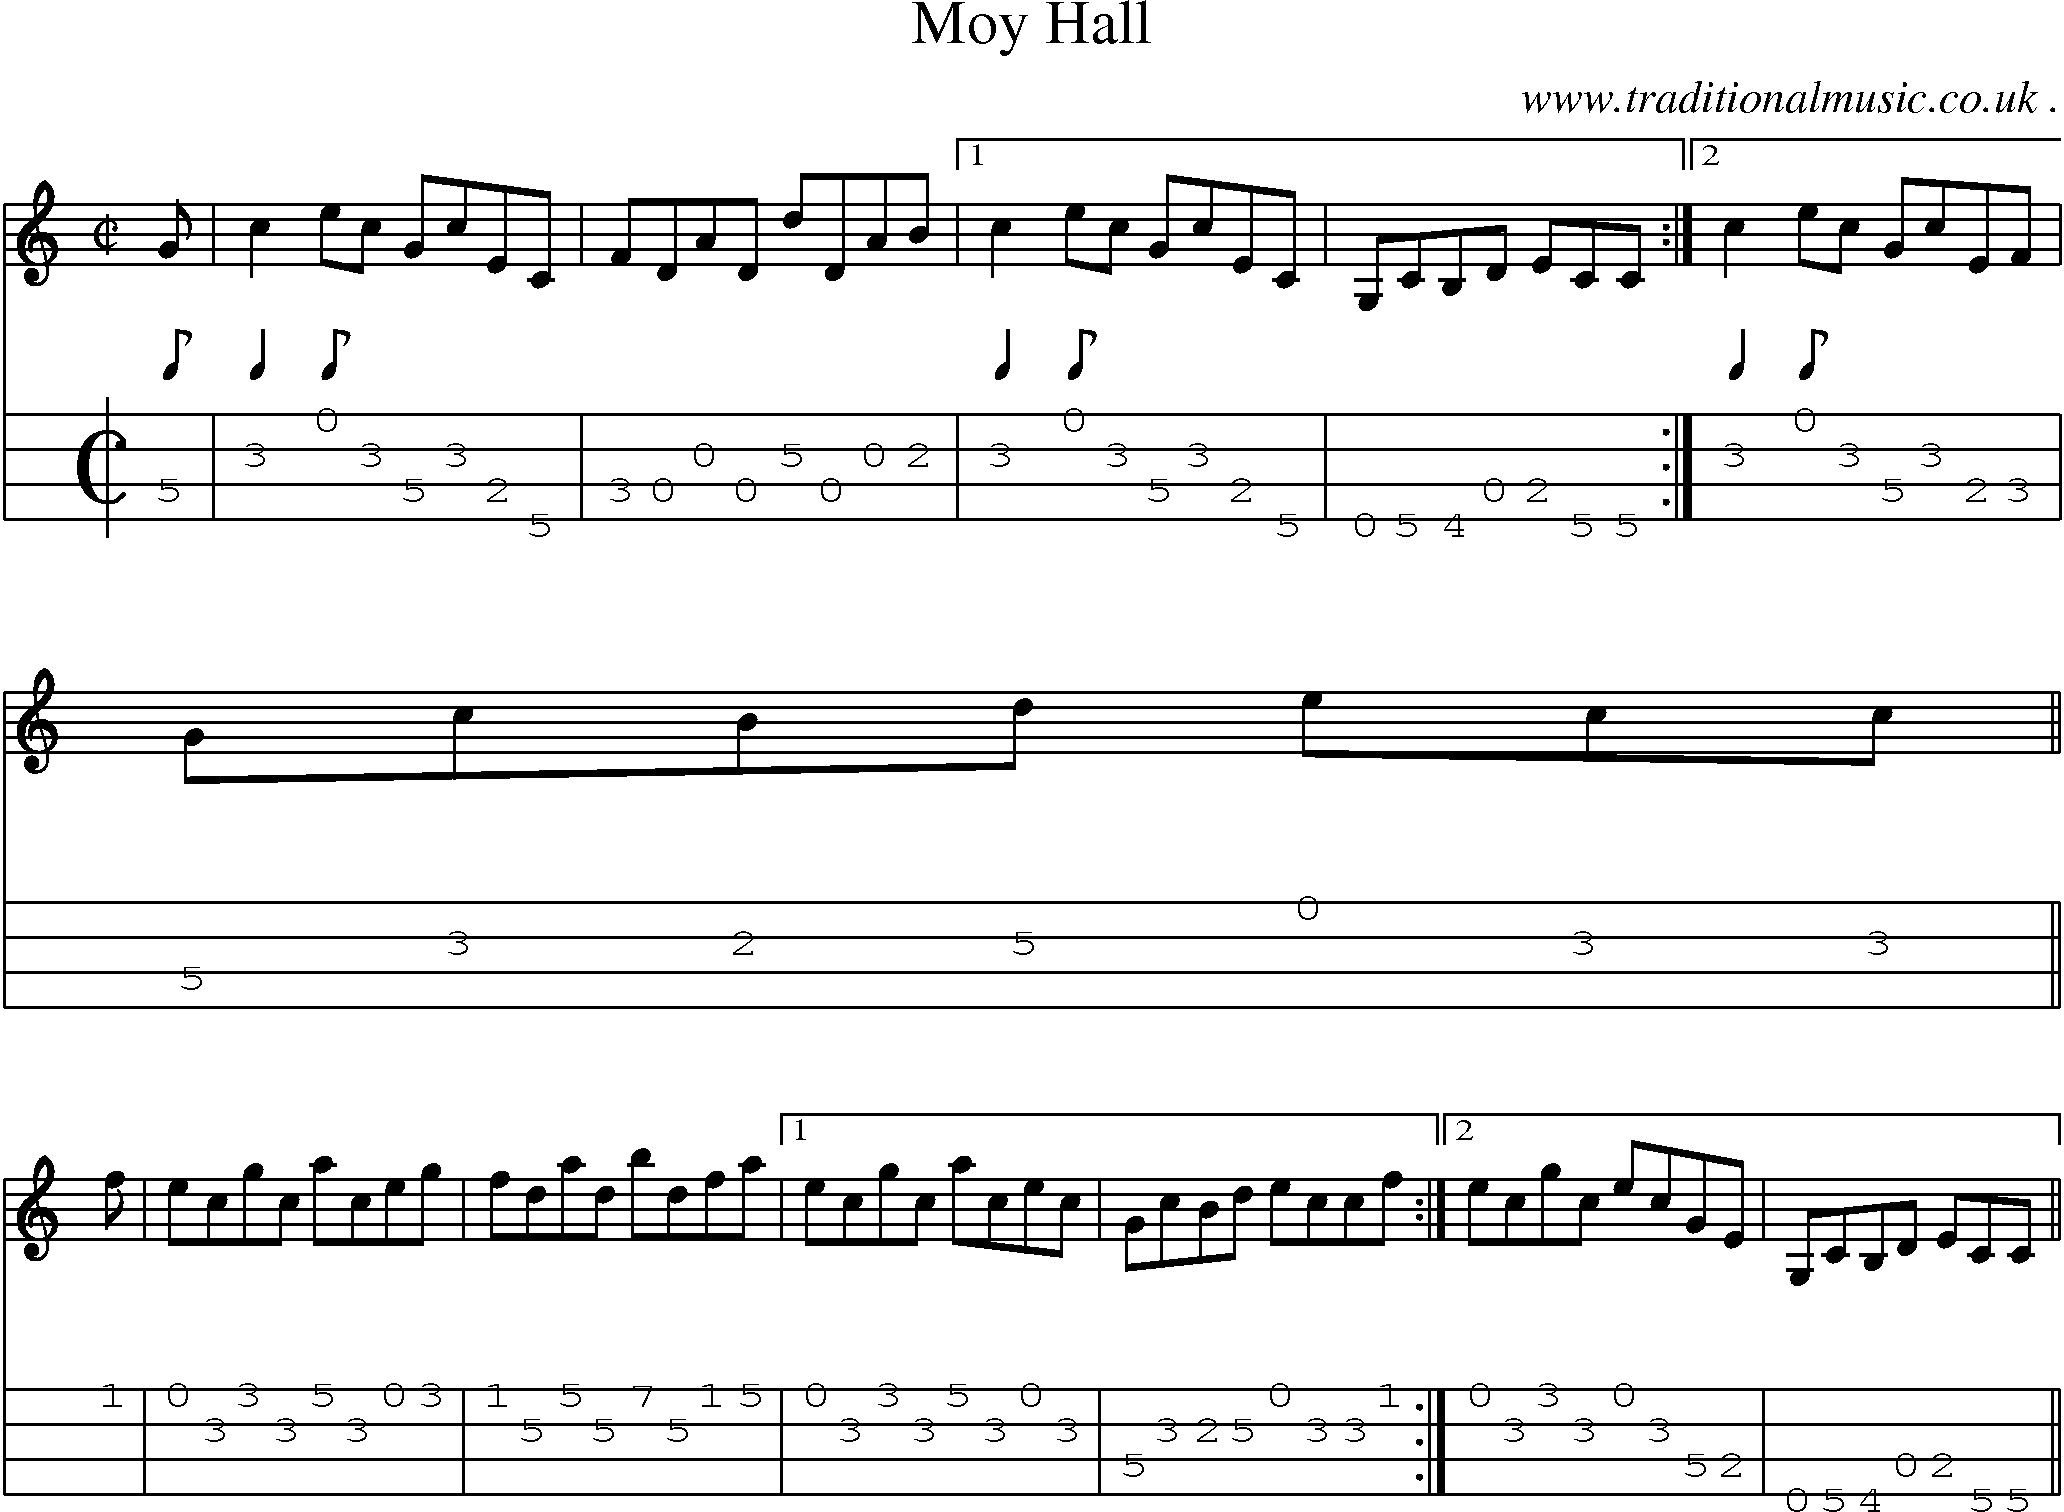 Sheet-music  score, Chords and Mandolin Tabs for Moy Hall